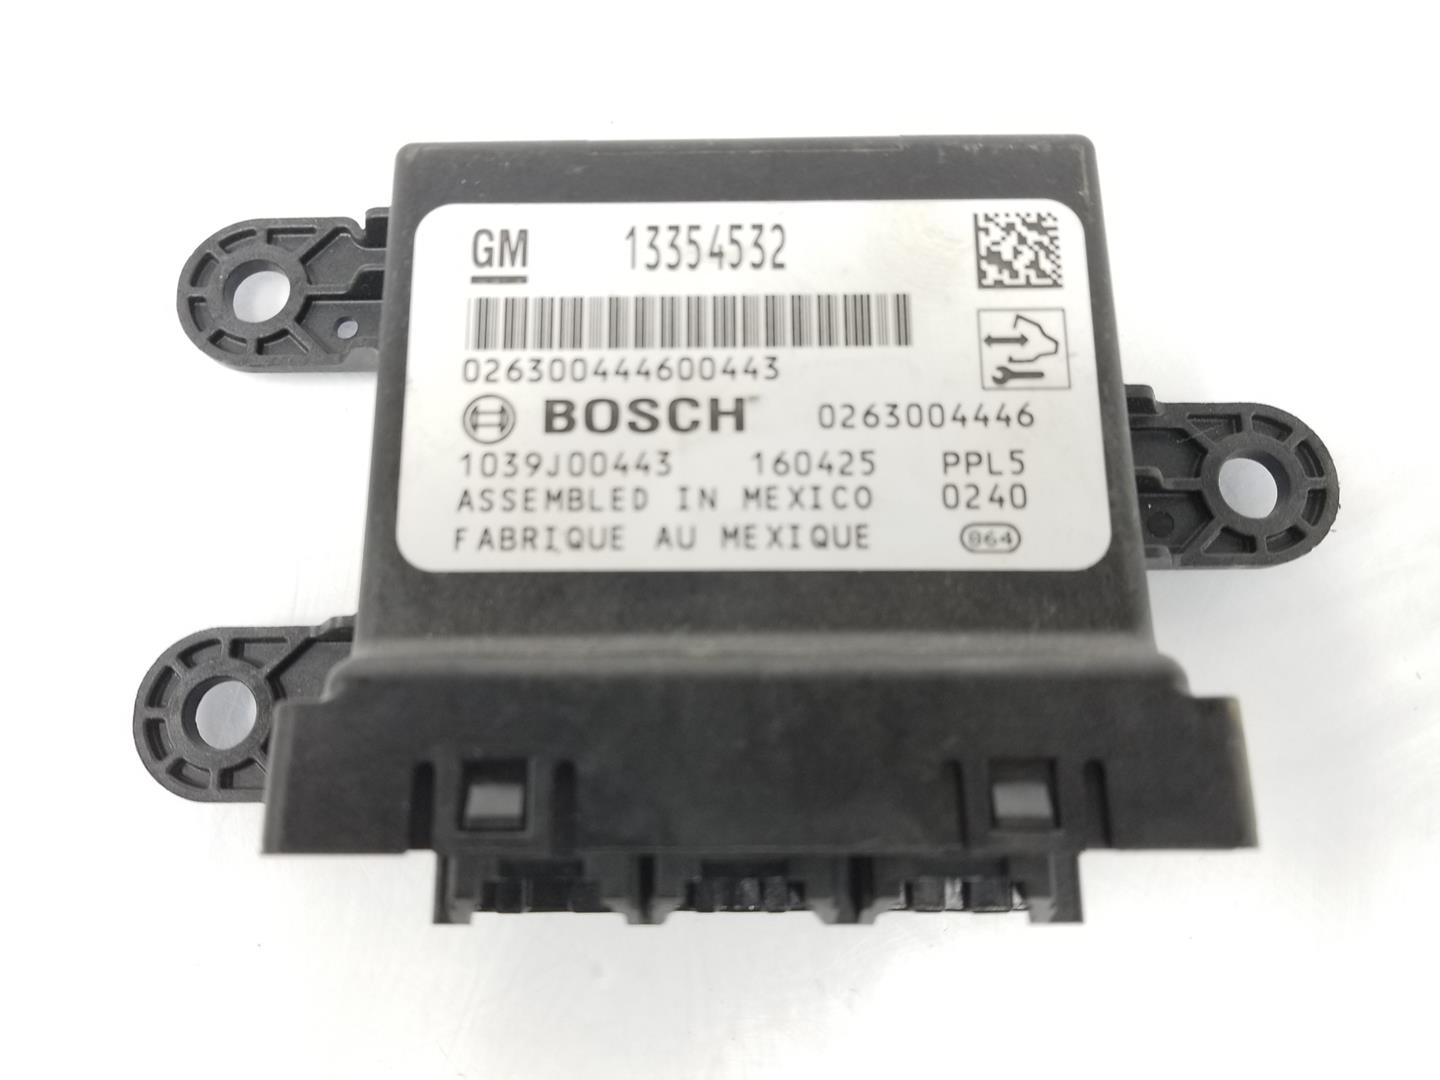 OPEL Insignia A (2008-2016) PDC Parking Distance Control Unit 13354532, 13354532 19790324